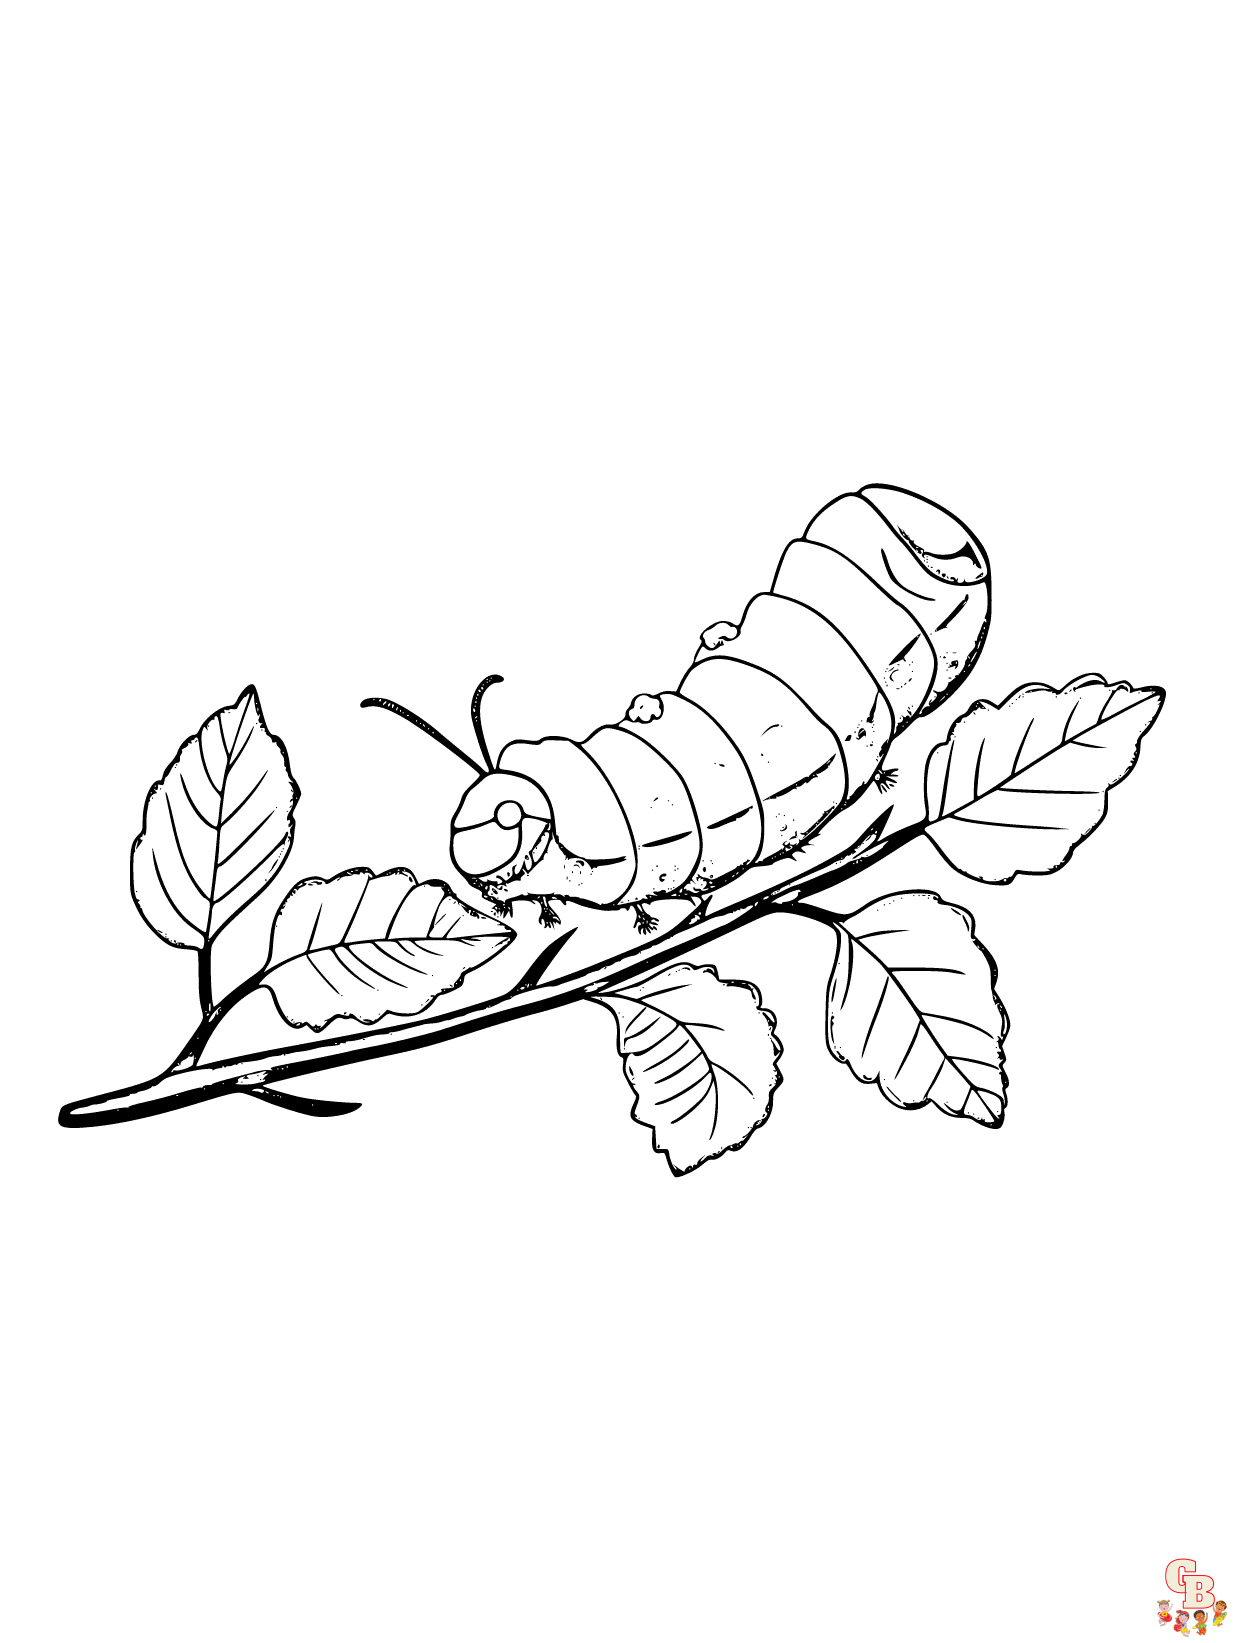 Caterpillar coloring pages 1